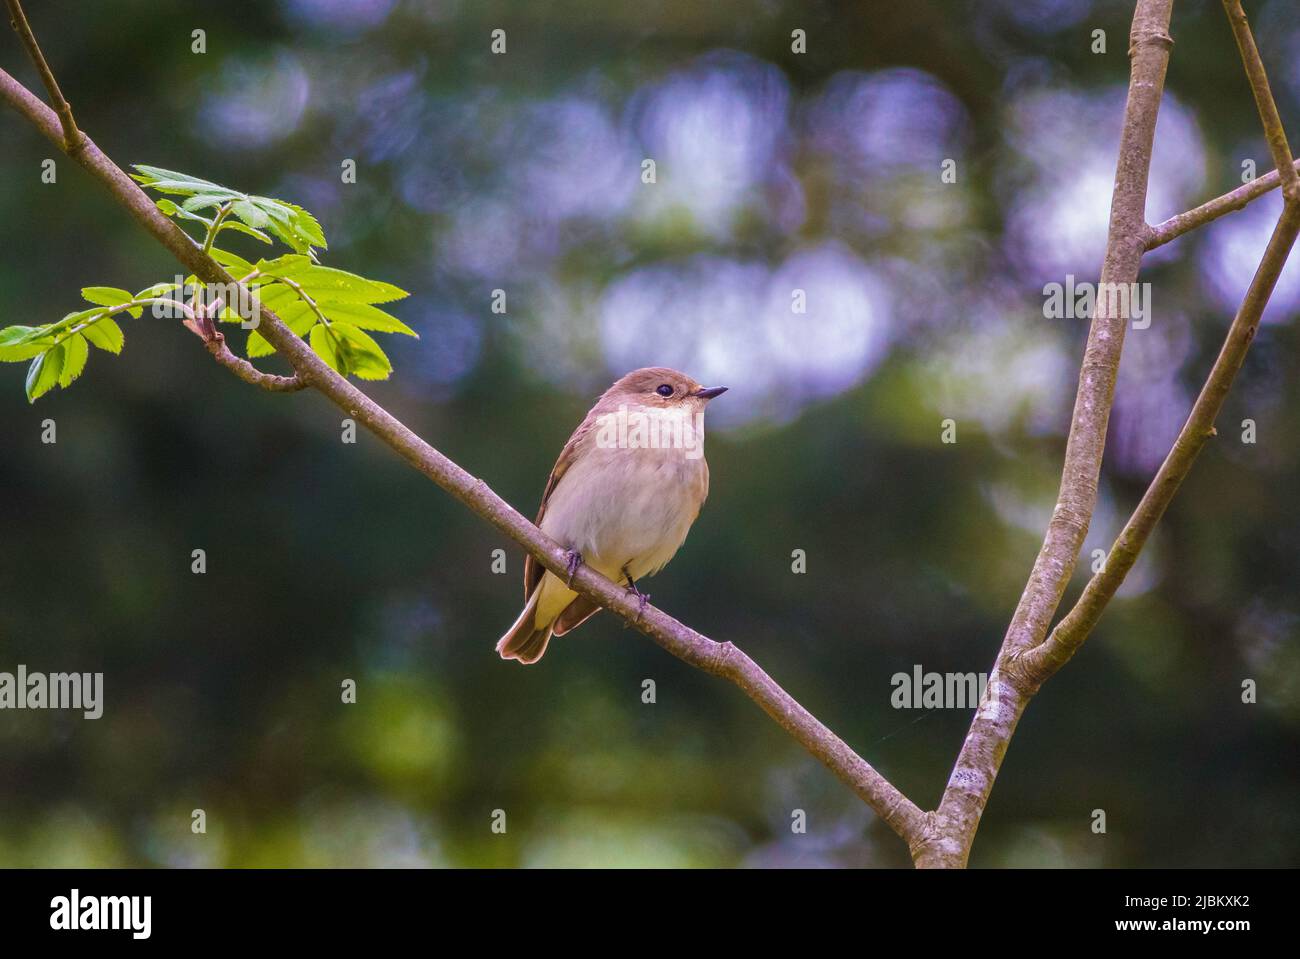 Muscicapa striata or The spotted flycatcher in a tree Stock Photo